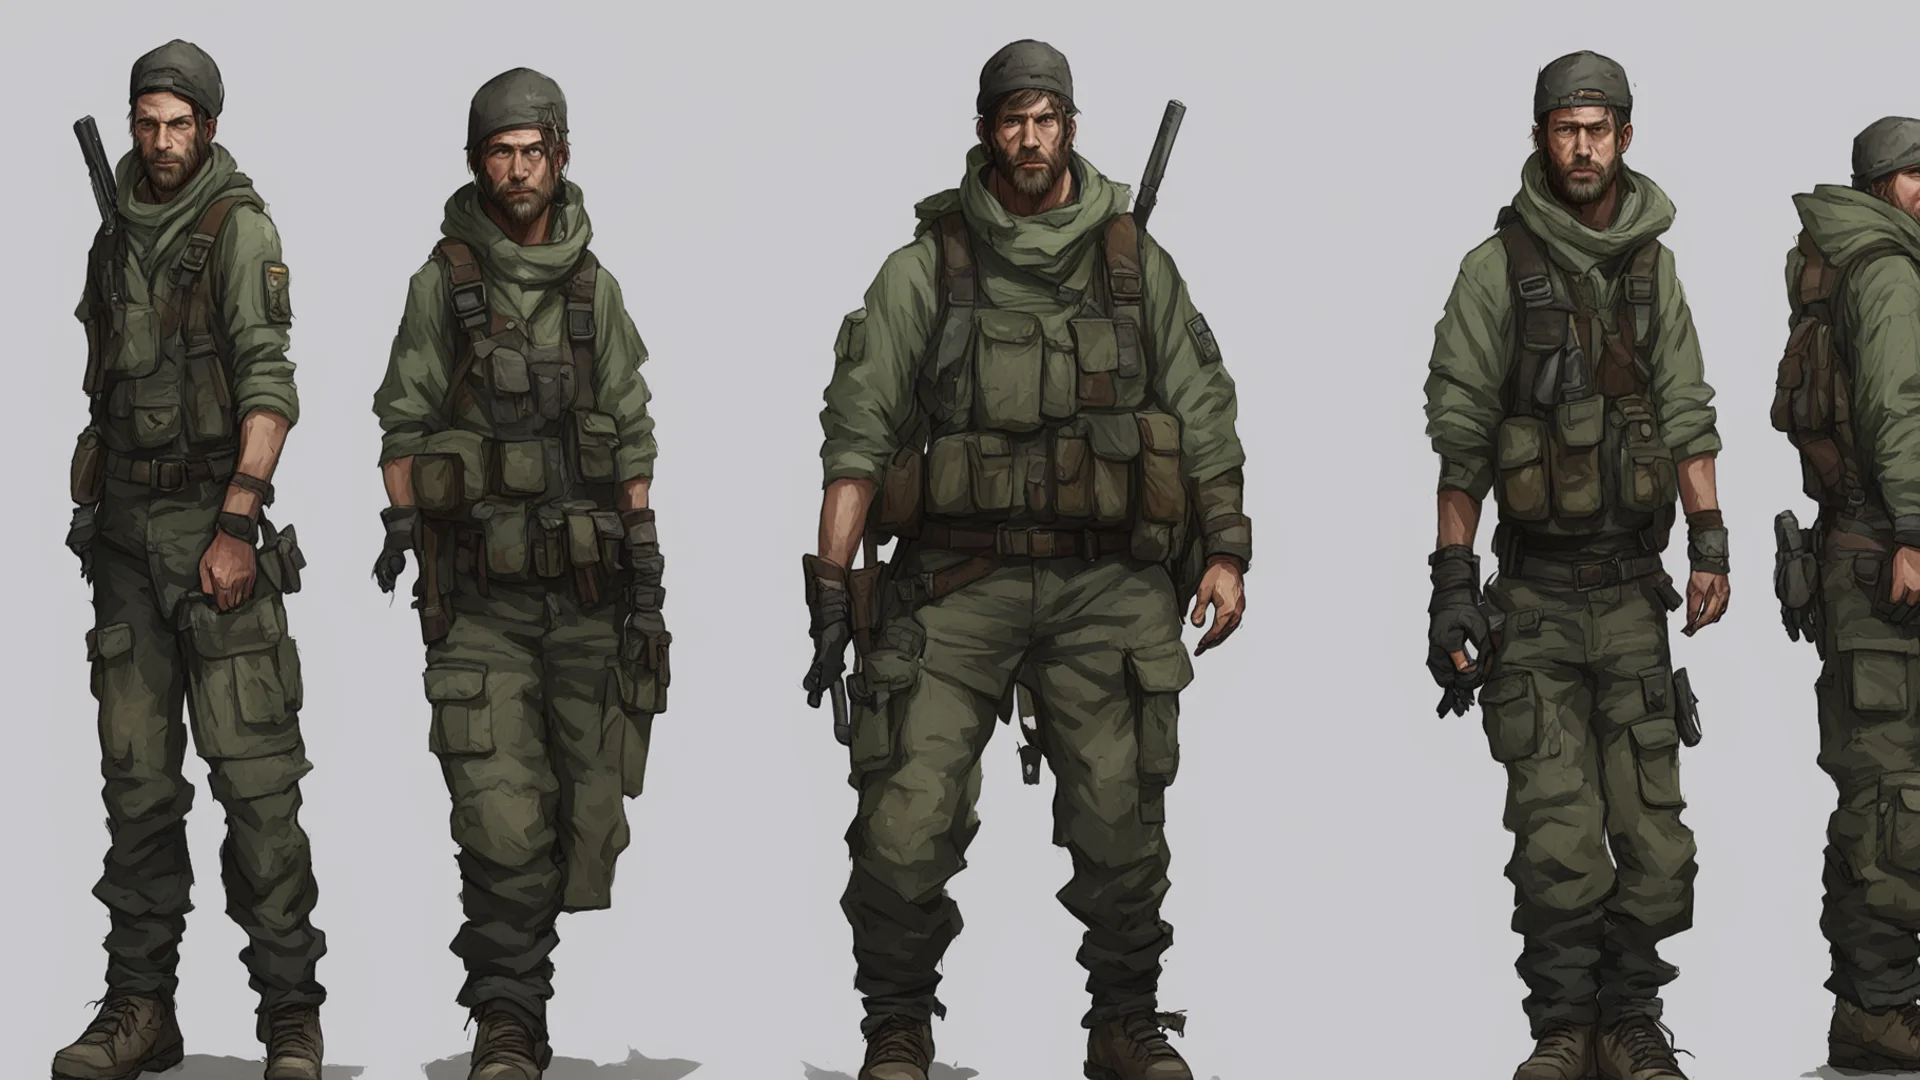 aia game character concept art inspired by survival games like dayz  wide